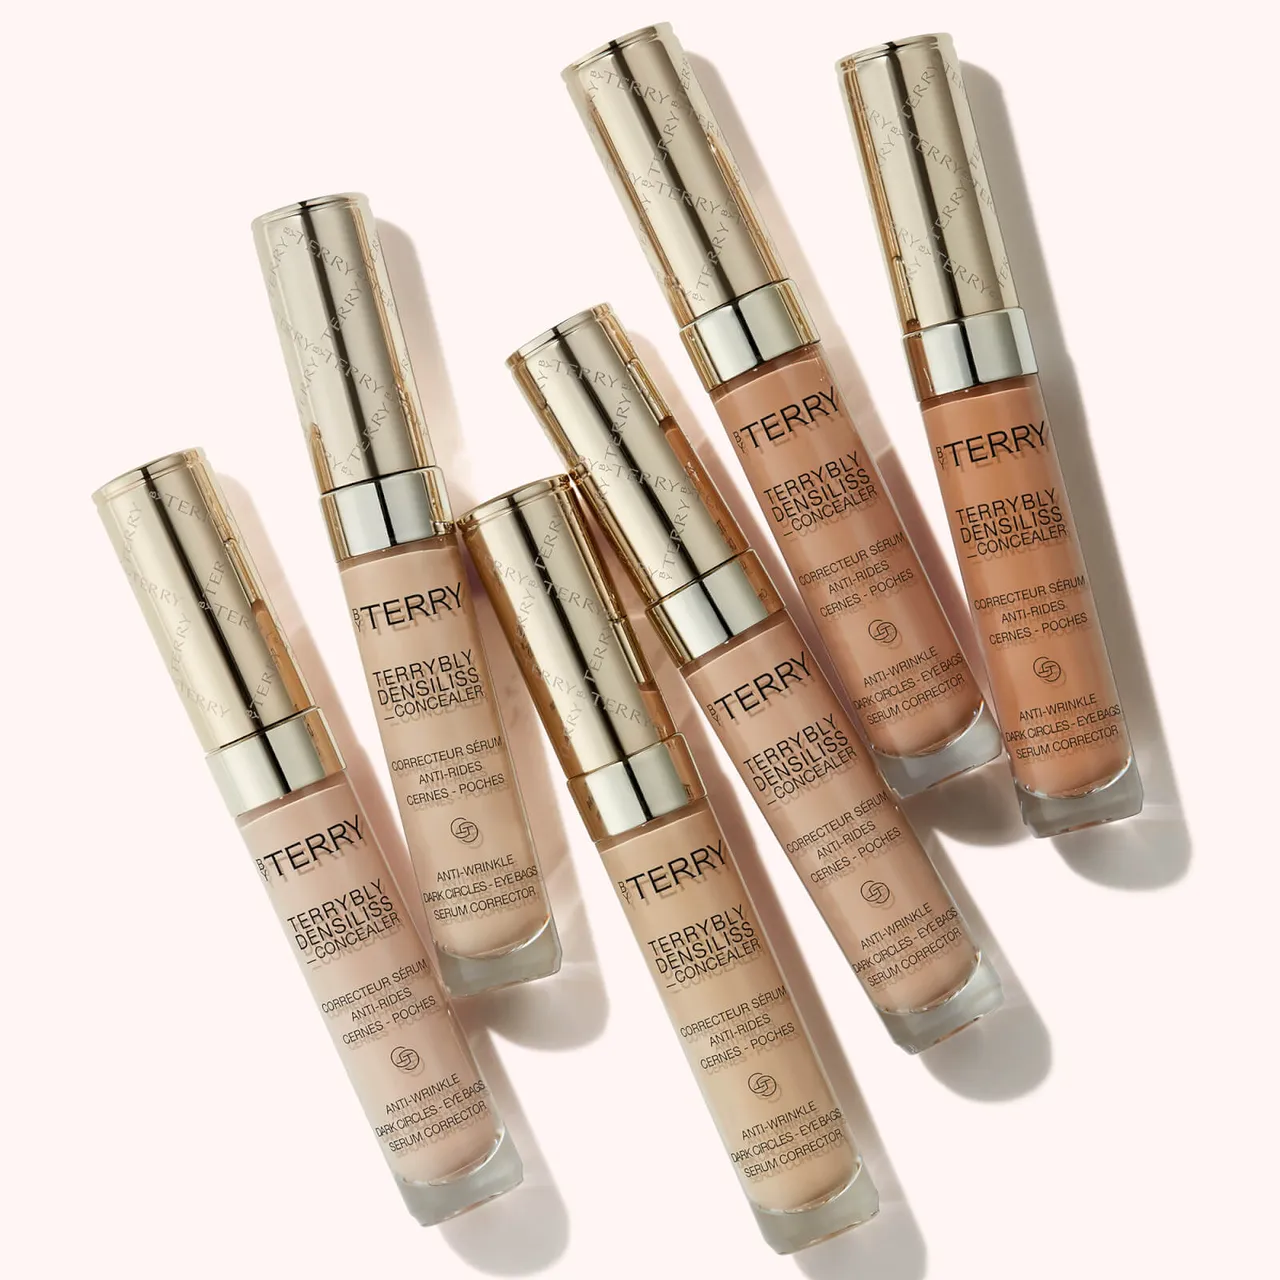 By Terry Terrybly Densiliss Concealer 7ml (Various Shades) - 1. Fresh Fair